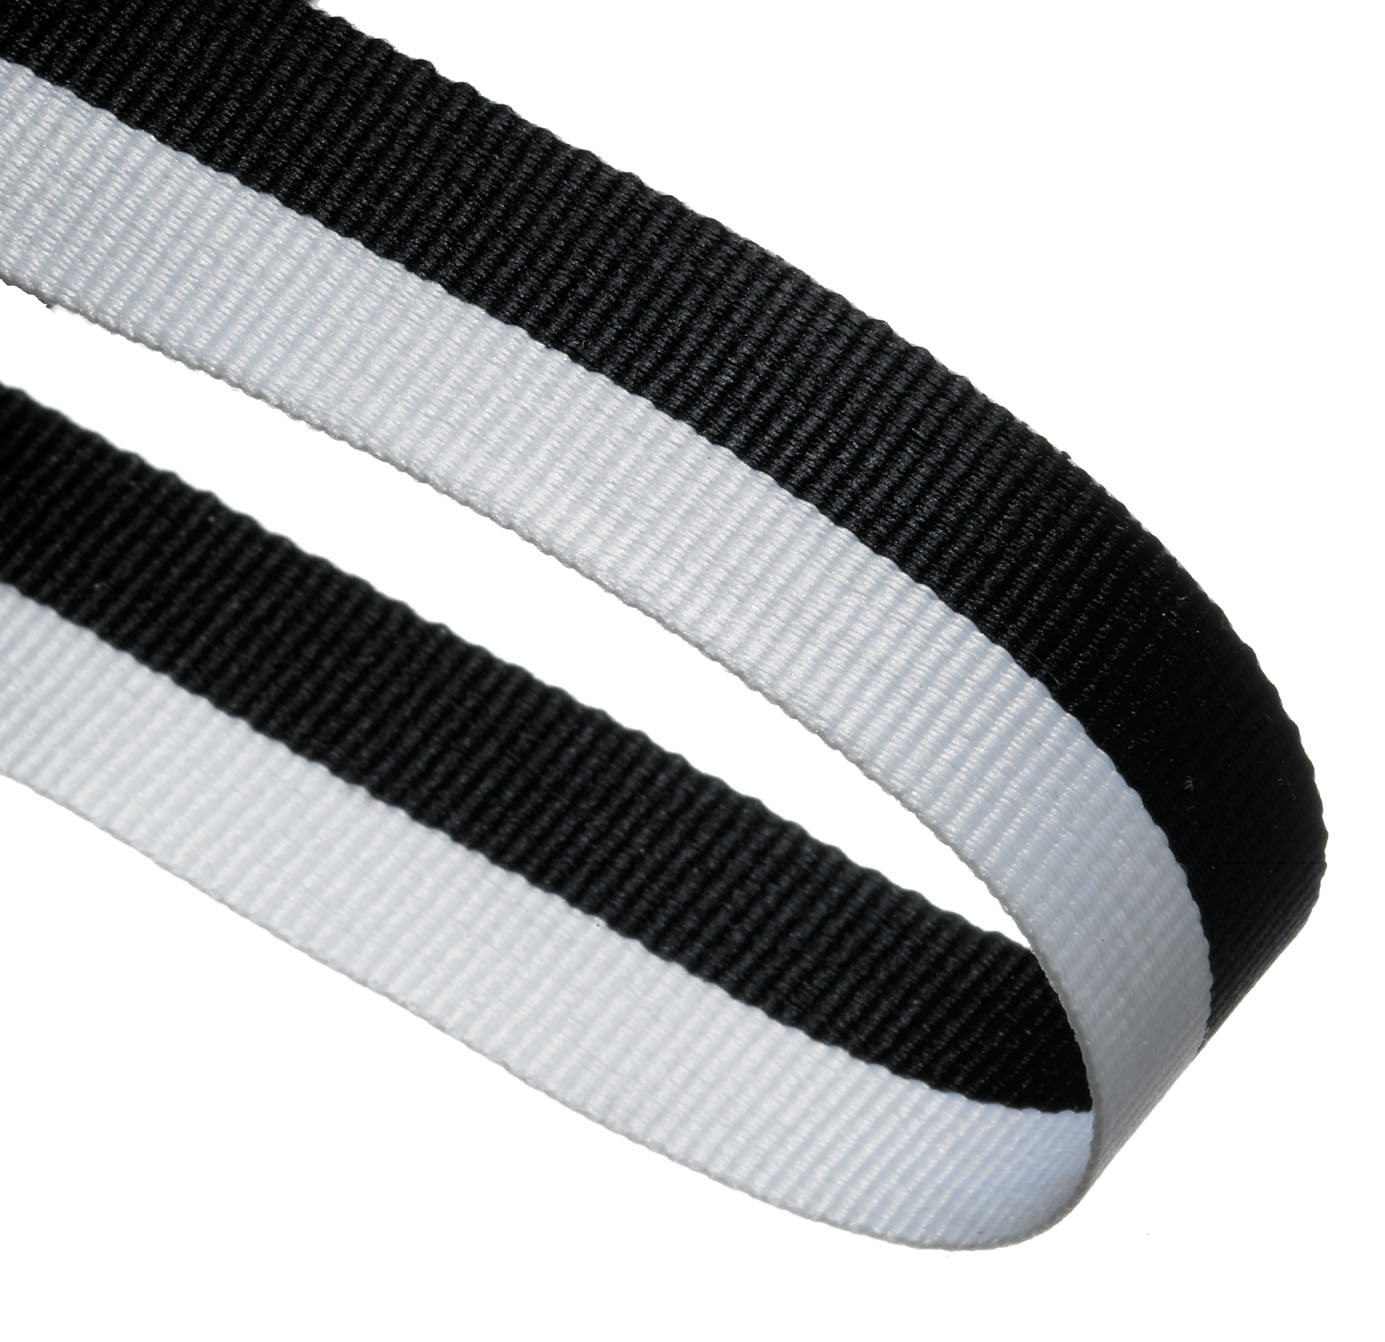 Black / White Woven Medal Ribbons With Clip